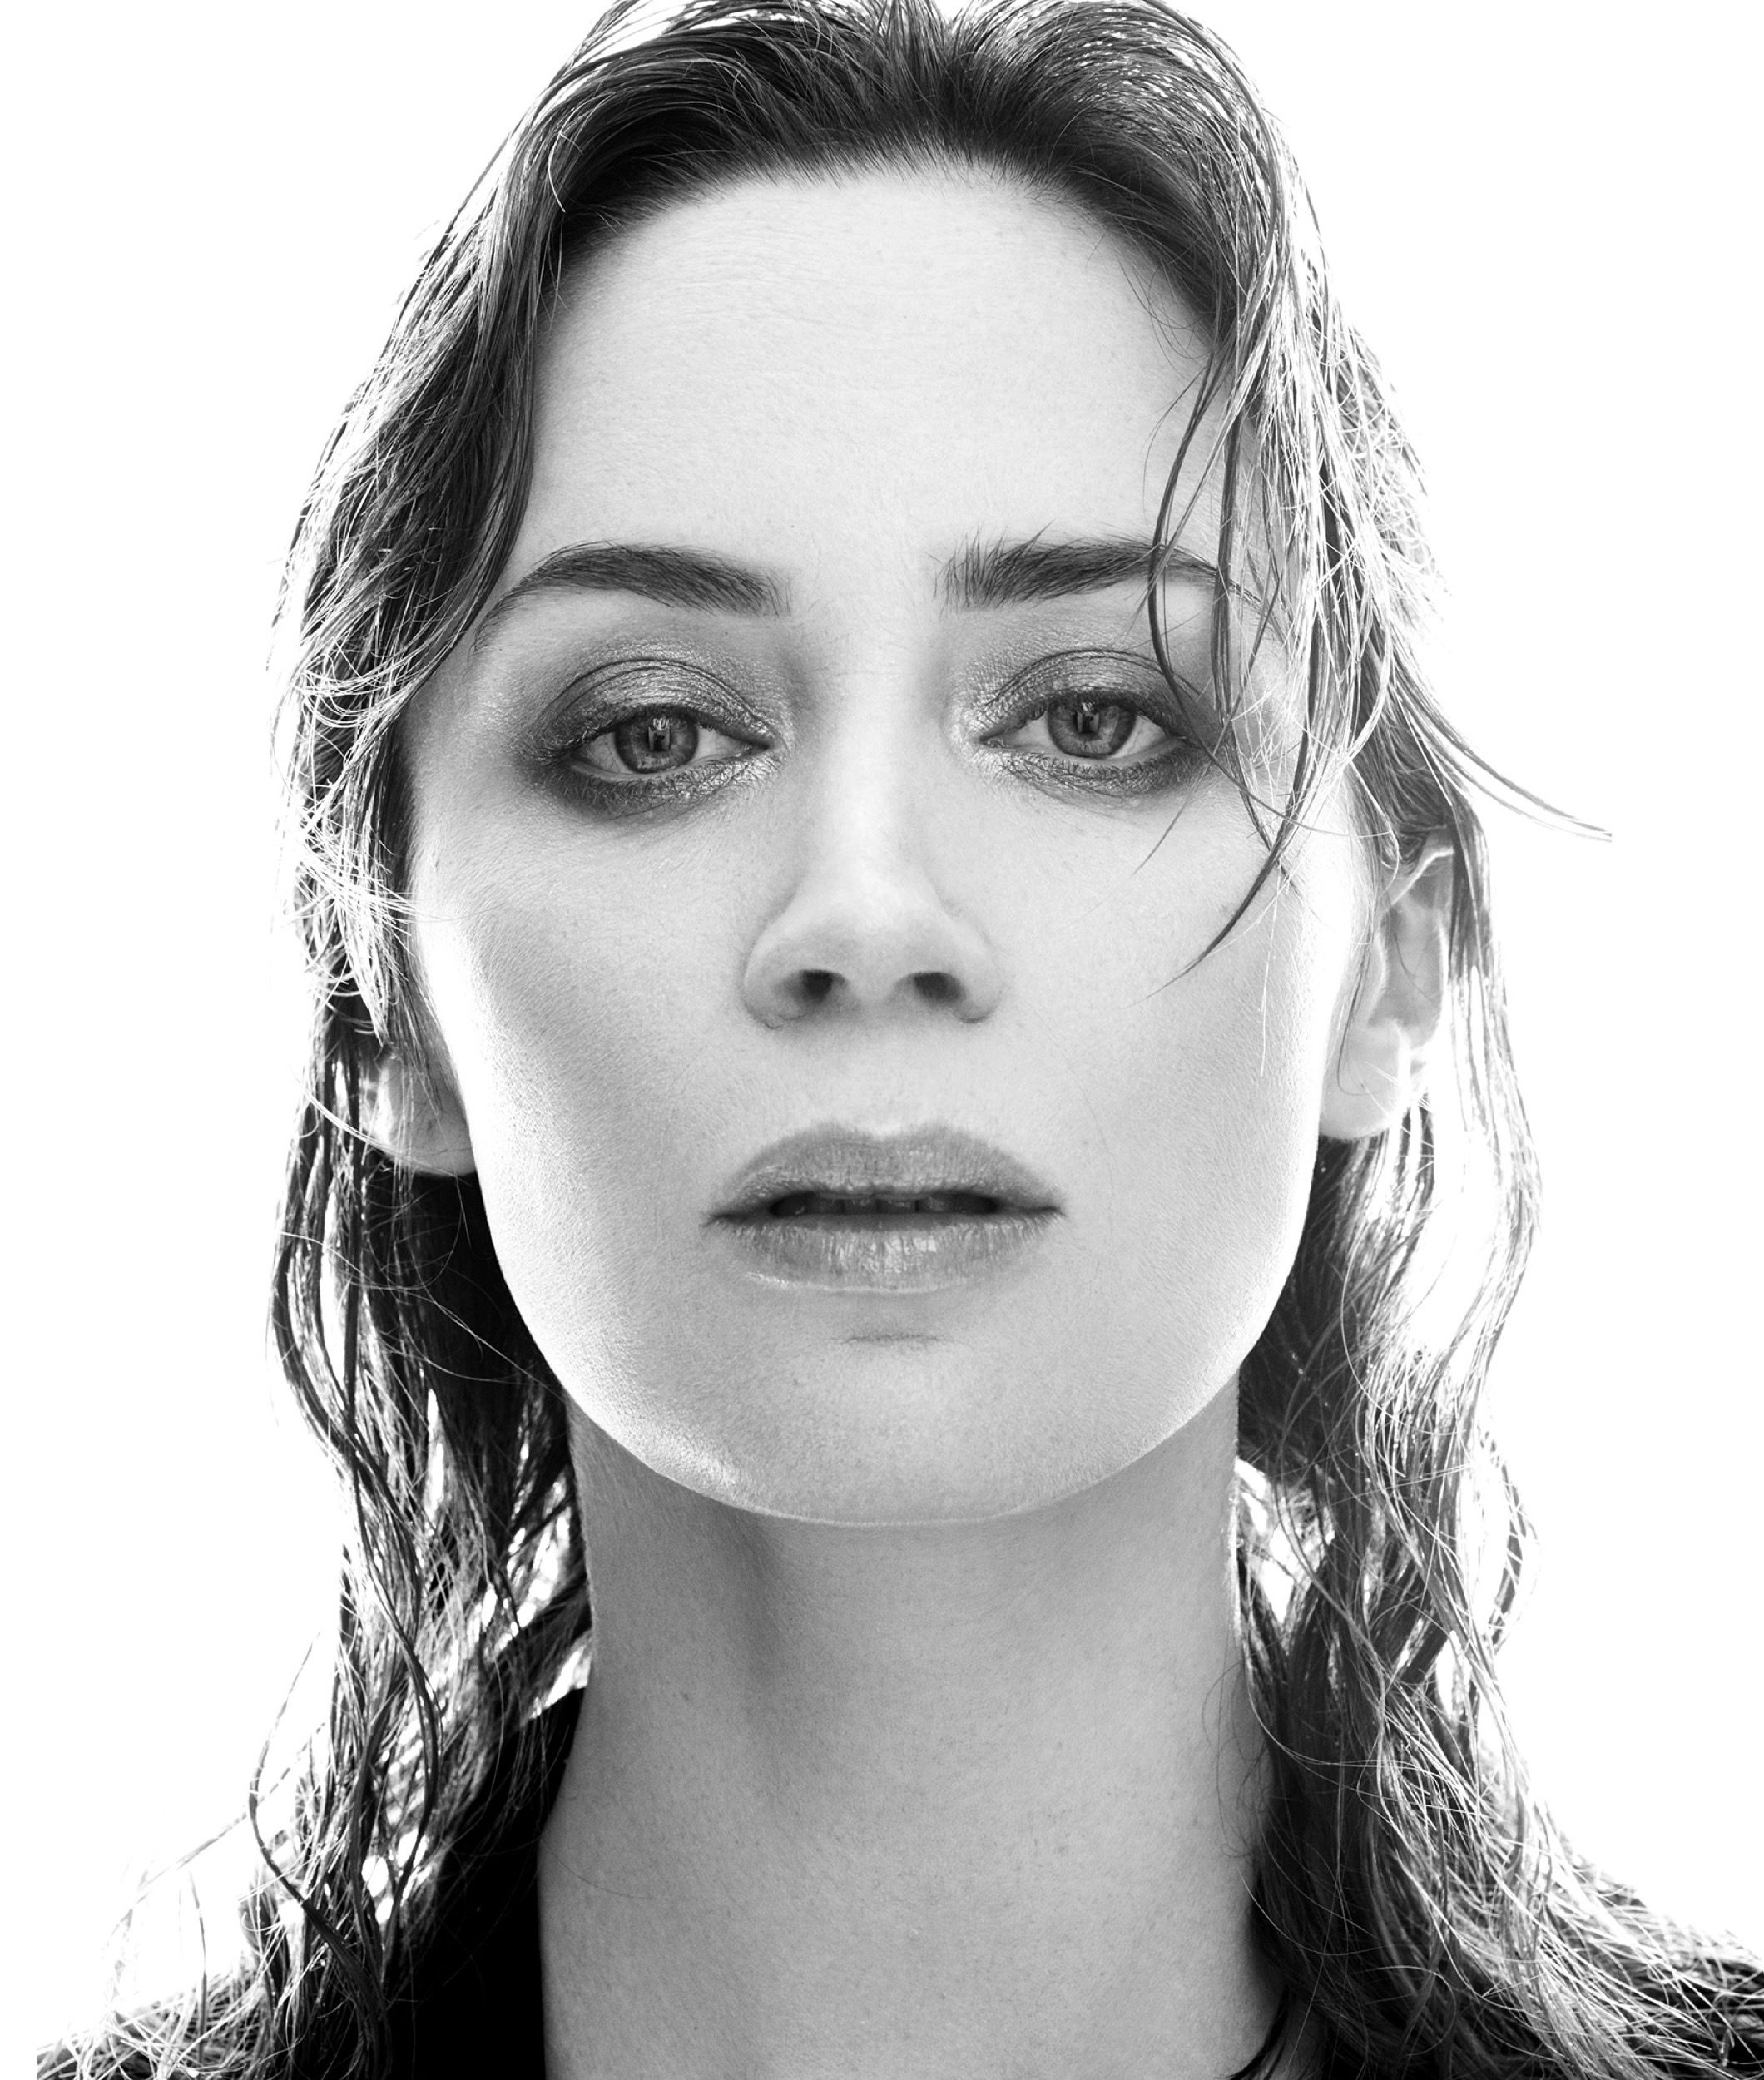 kathrin-hohberg-c-mag-emily-blunt-jan-welters-02